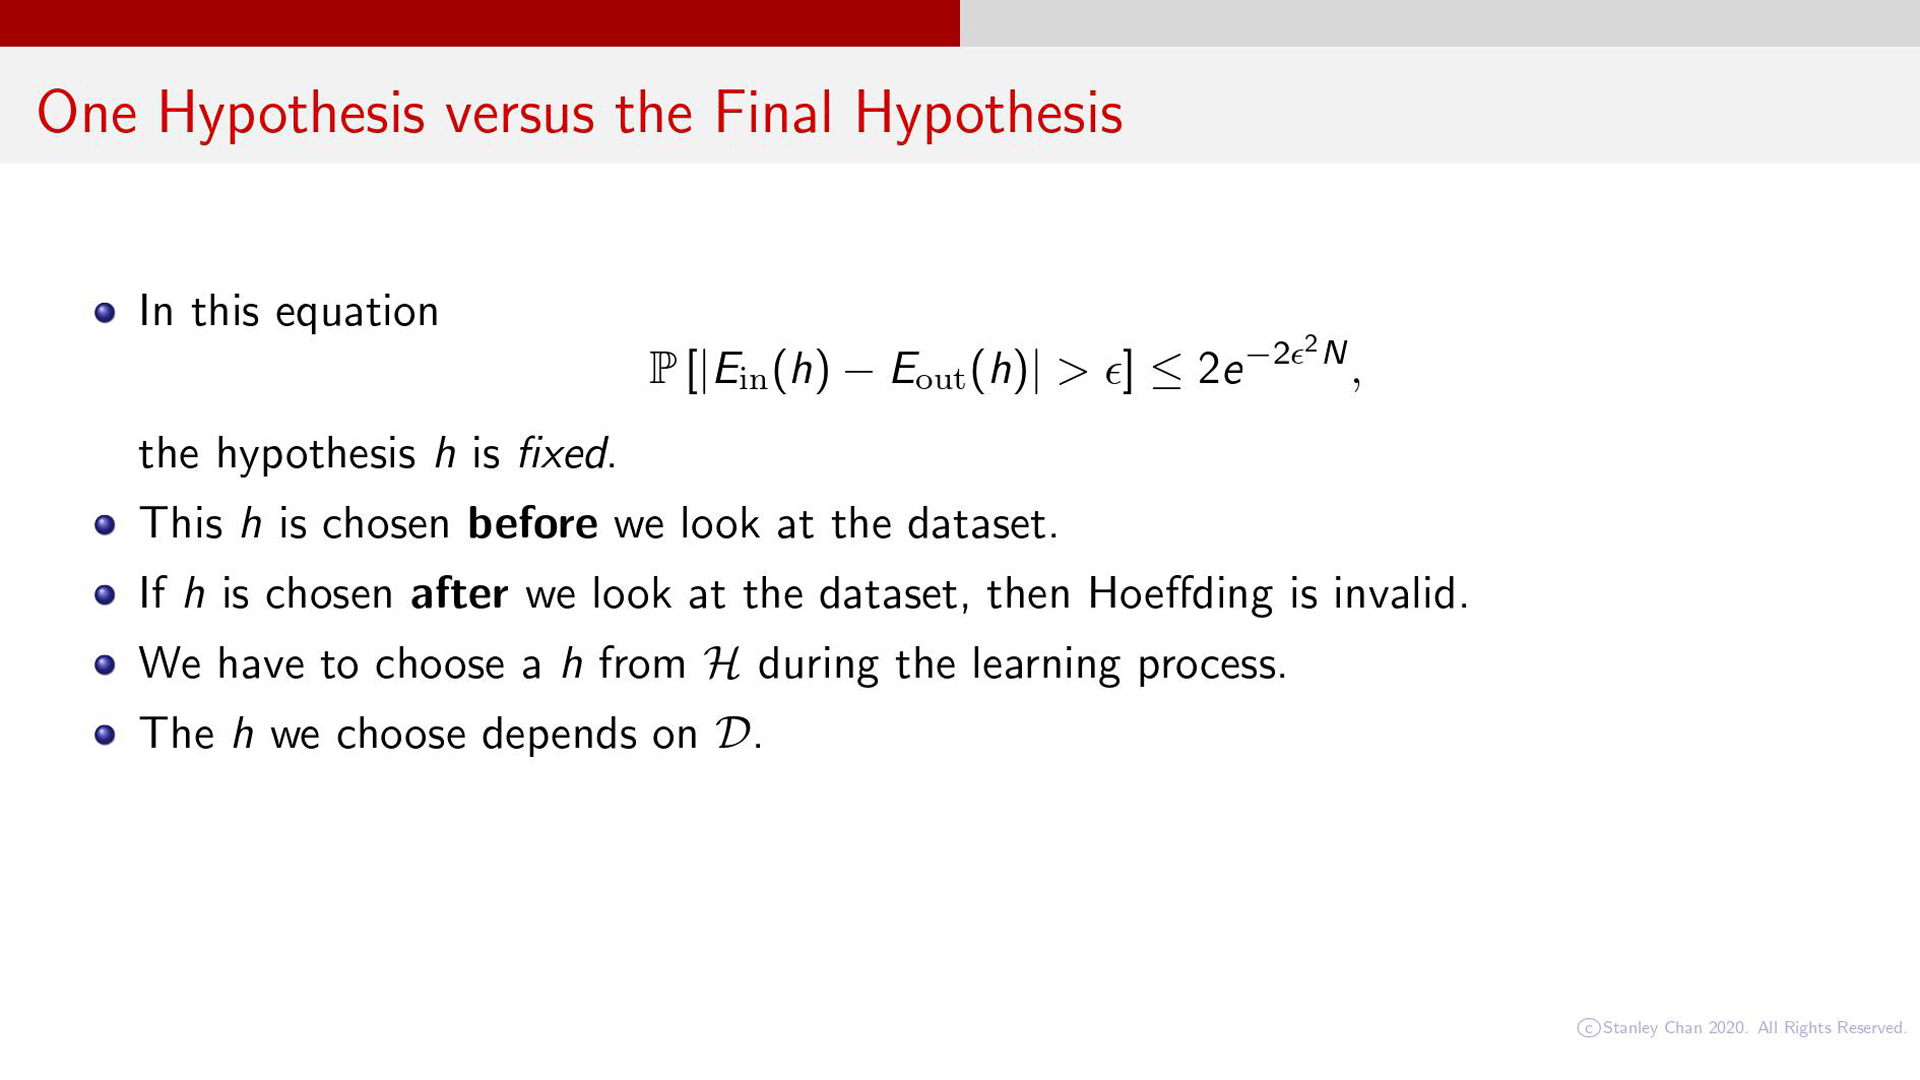 One Hypothesis versus the Final Hypothesis